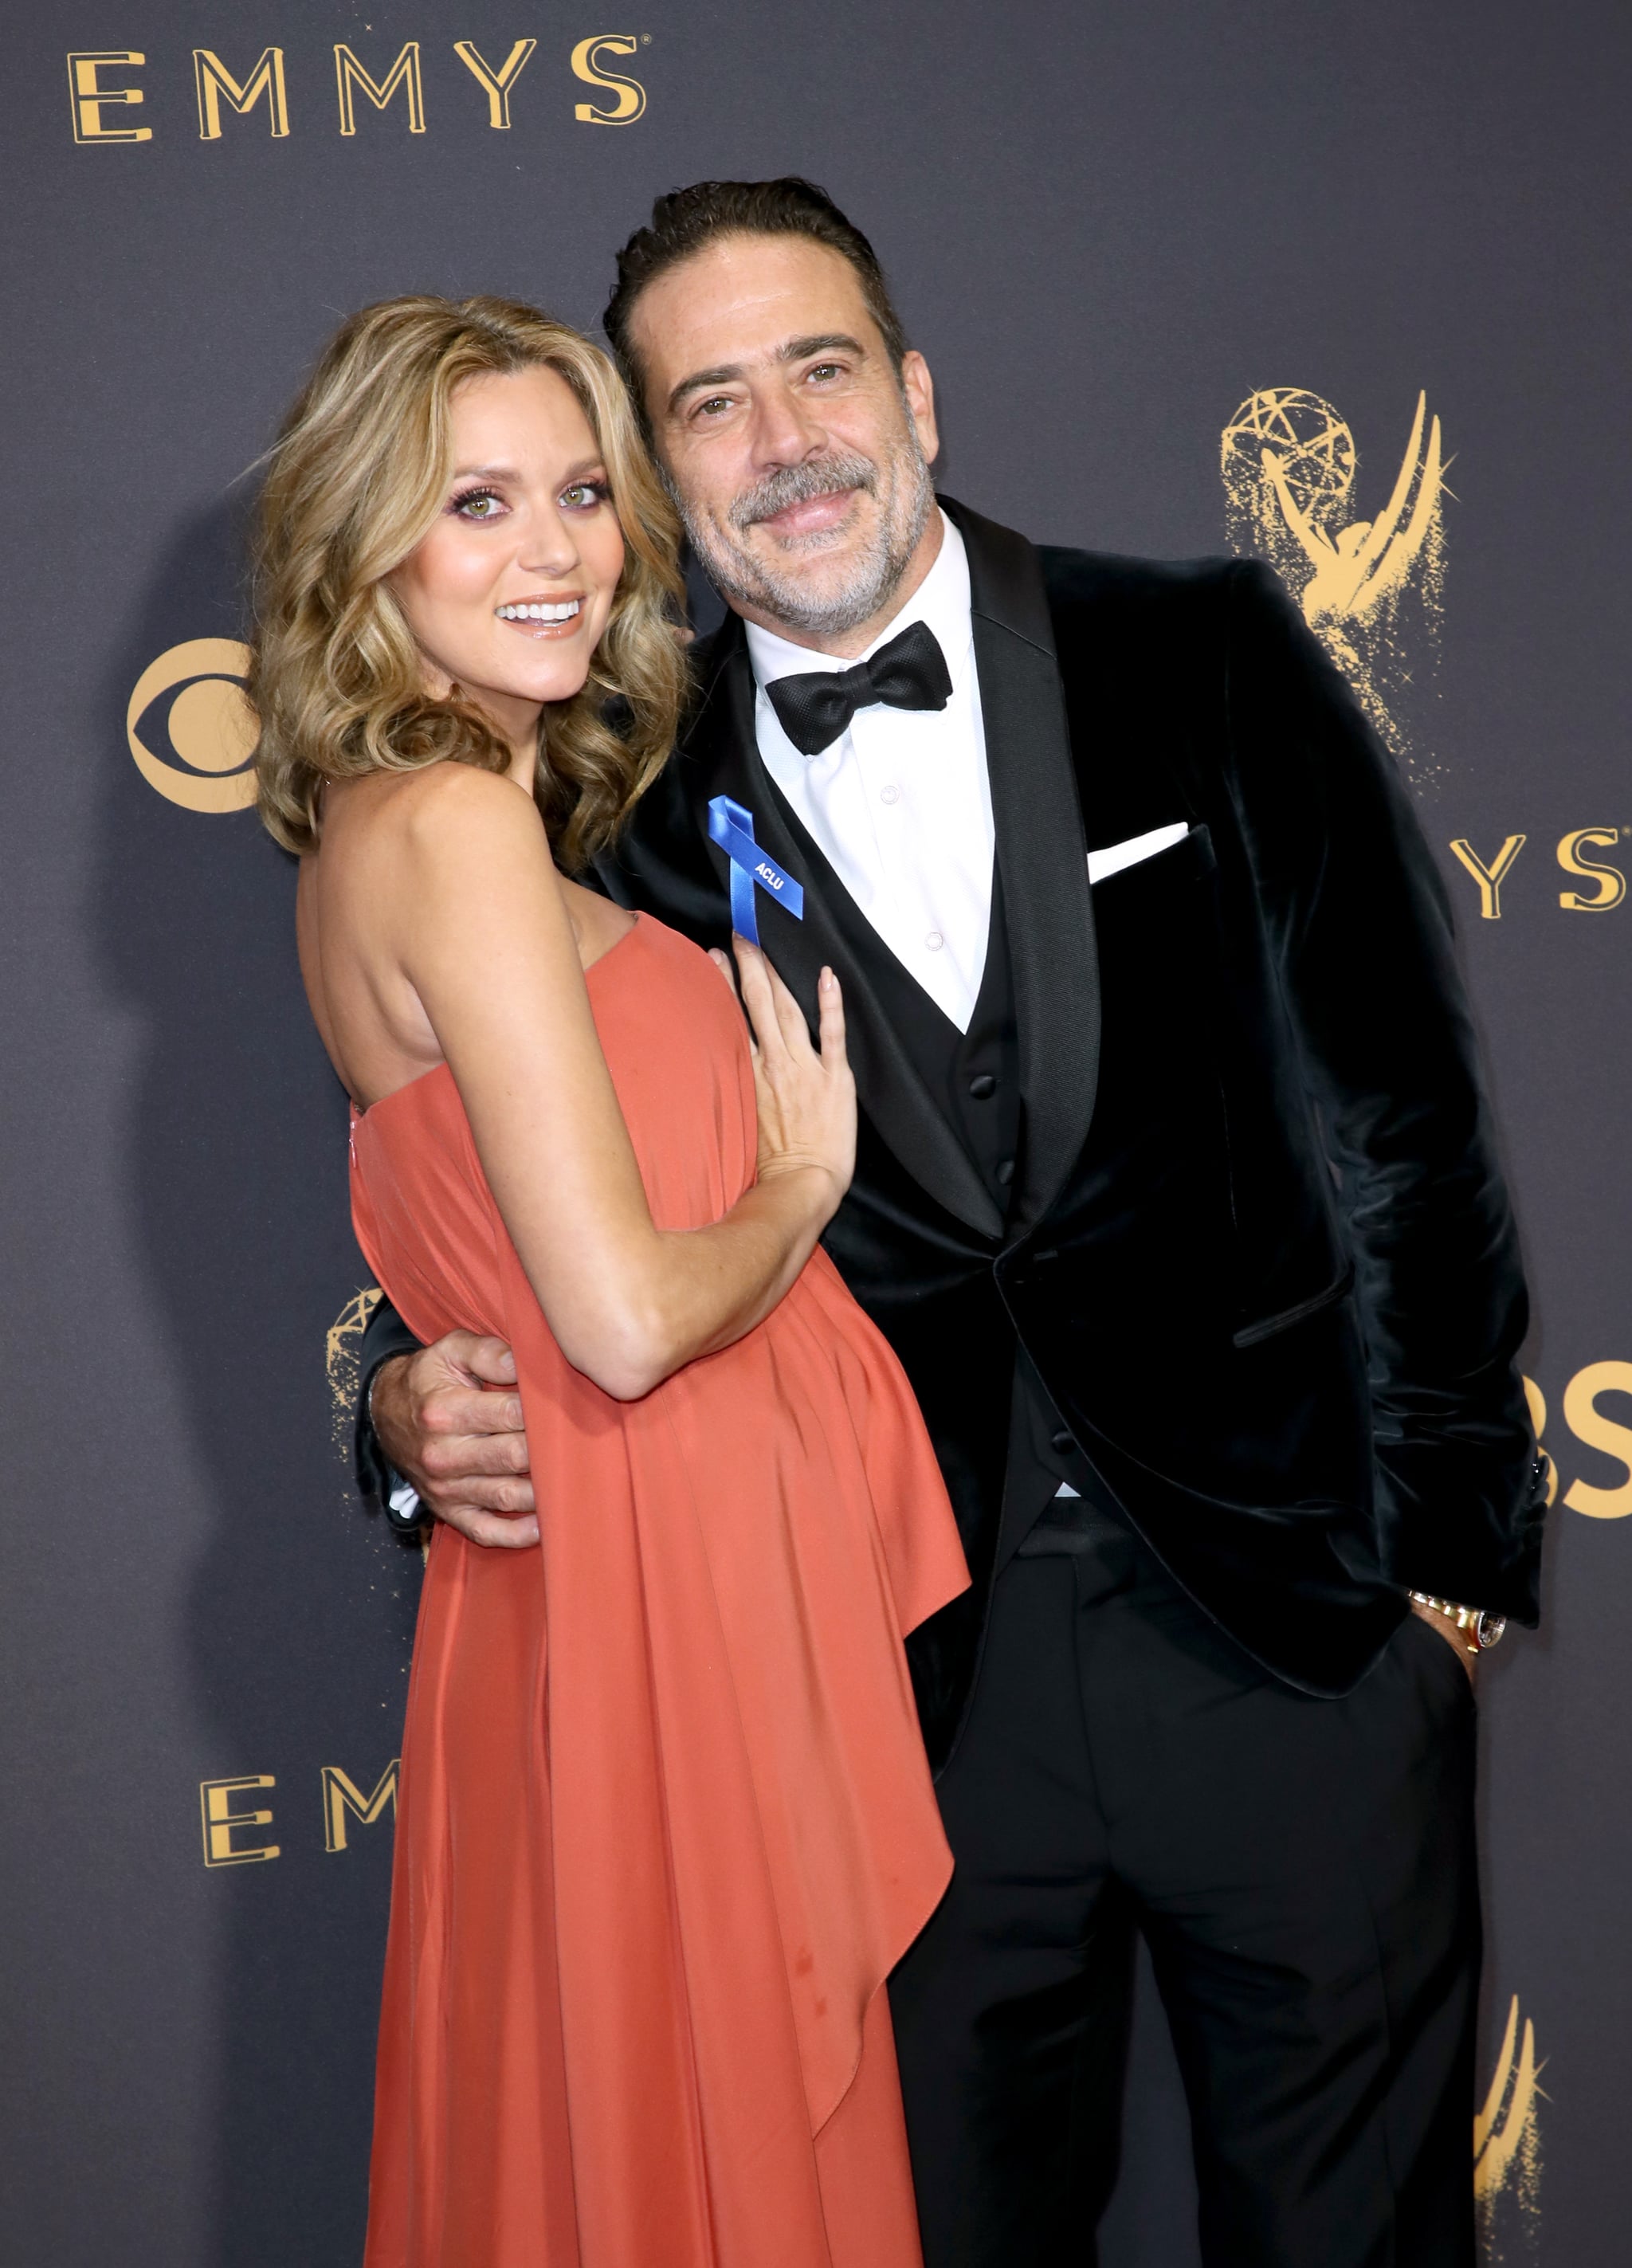 LOS ANGELES, CA - SEPTEMBER 17:  Actors Hilarie Burton (L) and Jeffrey Dean Morgan attend the 69th Annual Primetime Emmy Awards - Arrivals at Microsoft Theater on September 17, 2017 in Los Angeles, California.  (Photo by David Livingston/Getty Images)